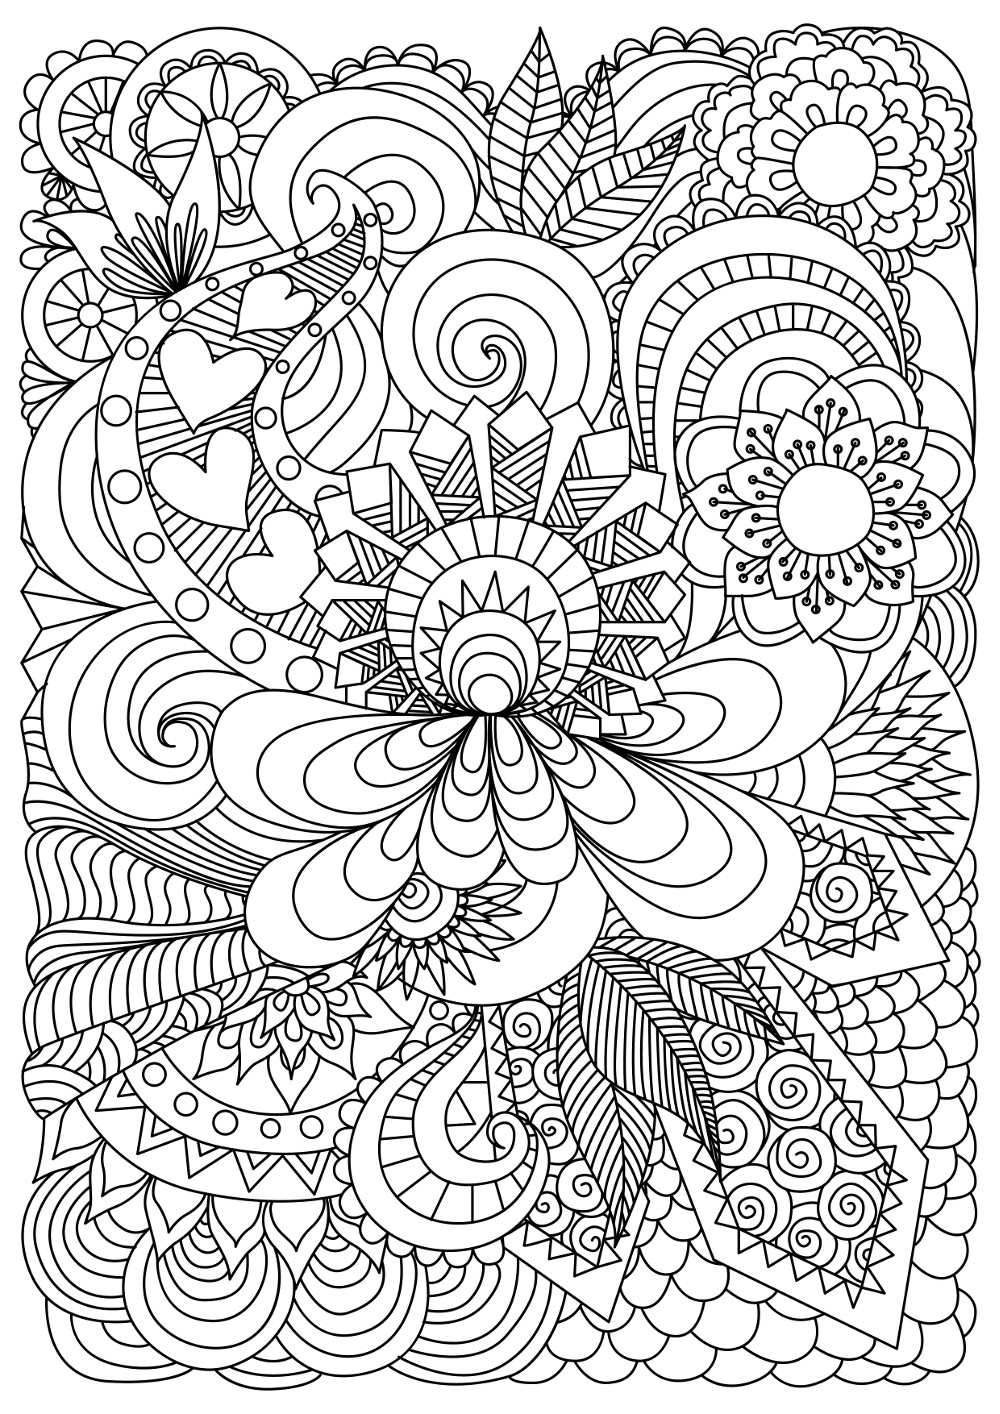 Download 37 Best Adults Coloring Pages - Updated 2018